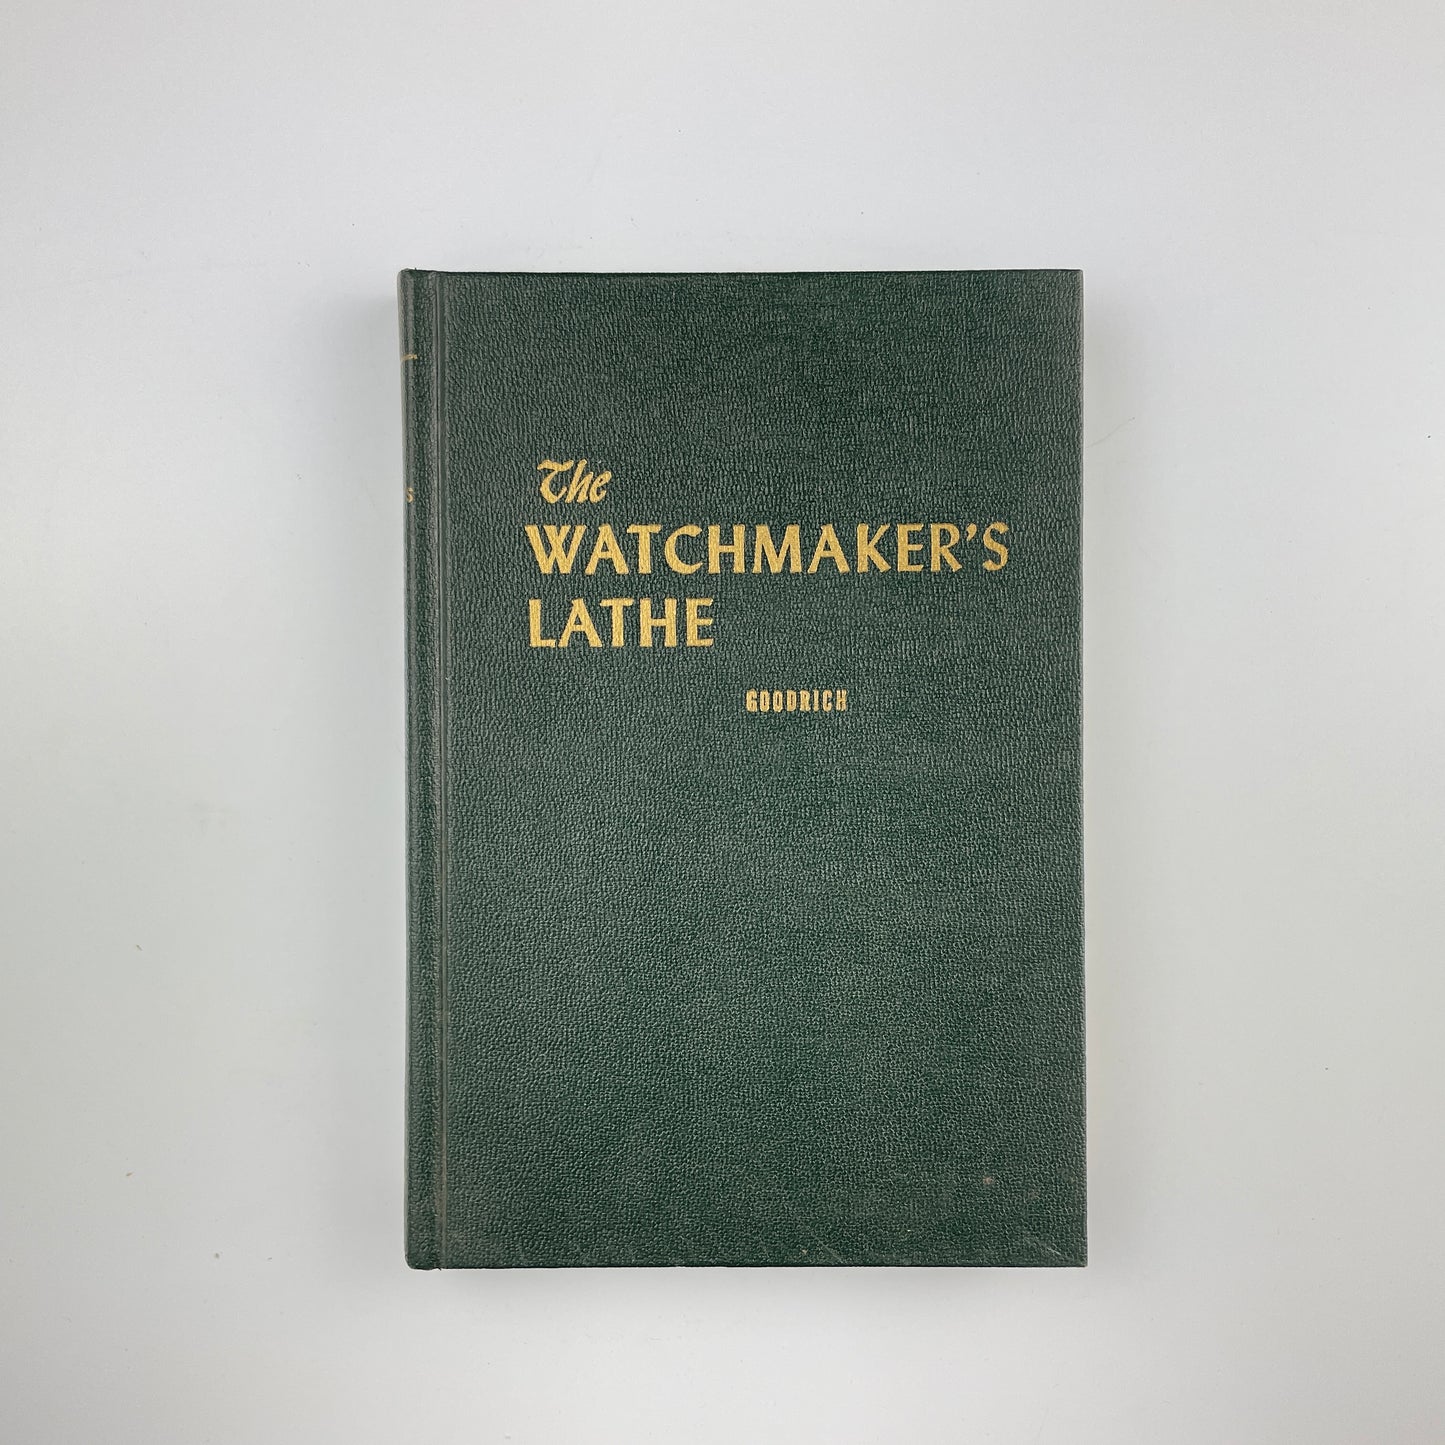 The Watchmaker's Lathe, 1974